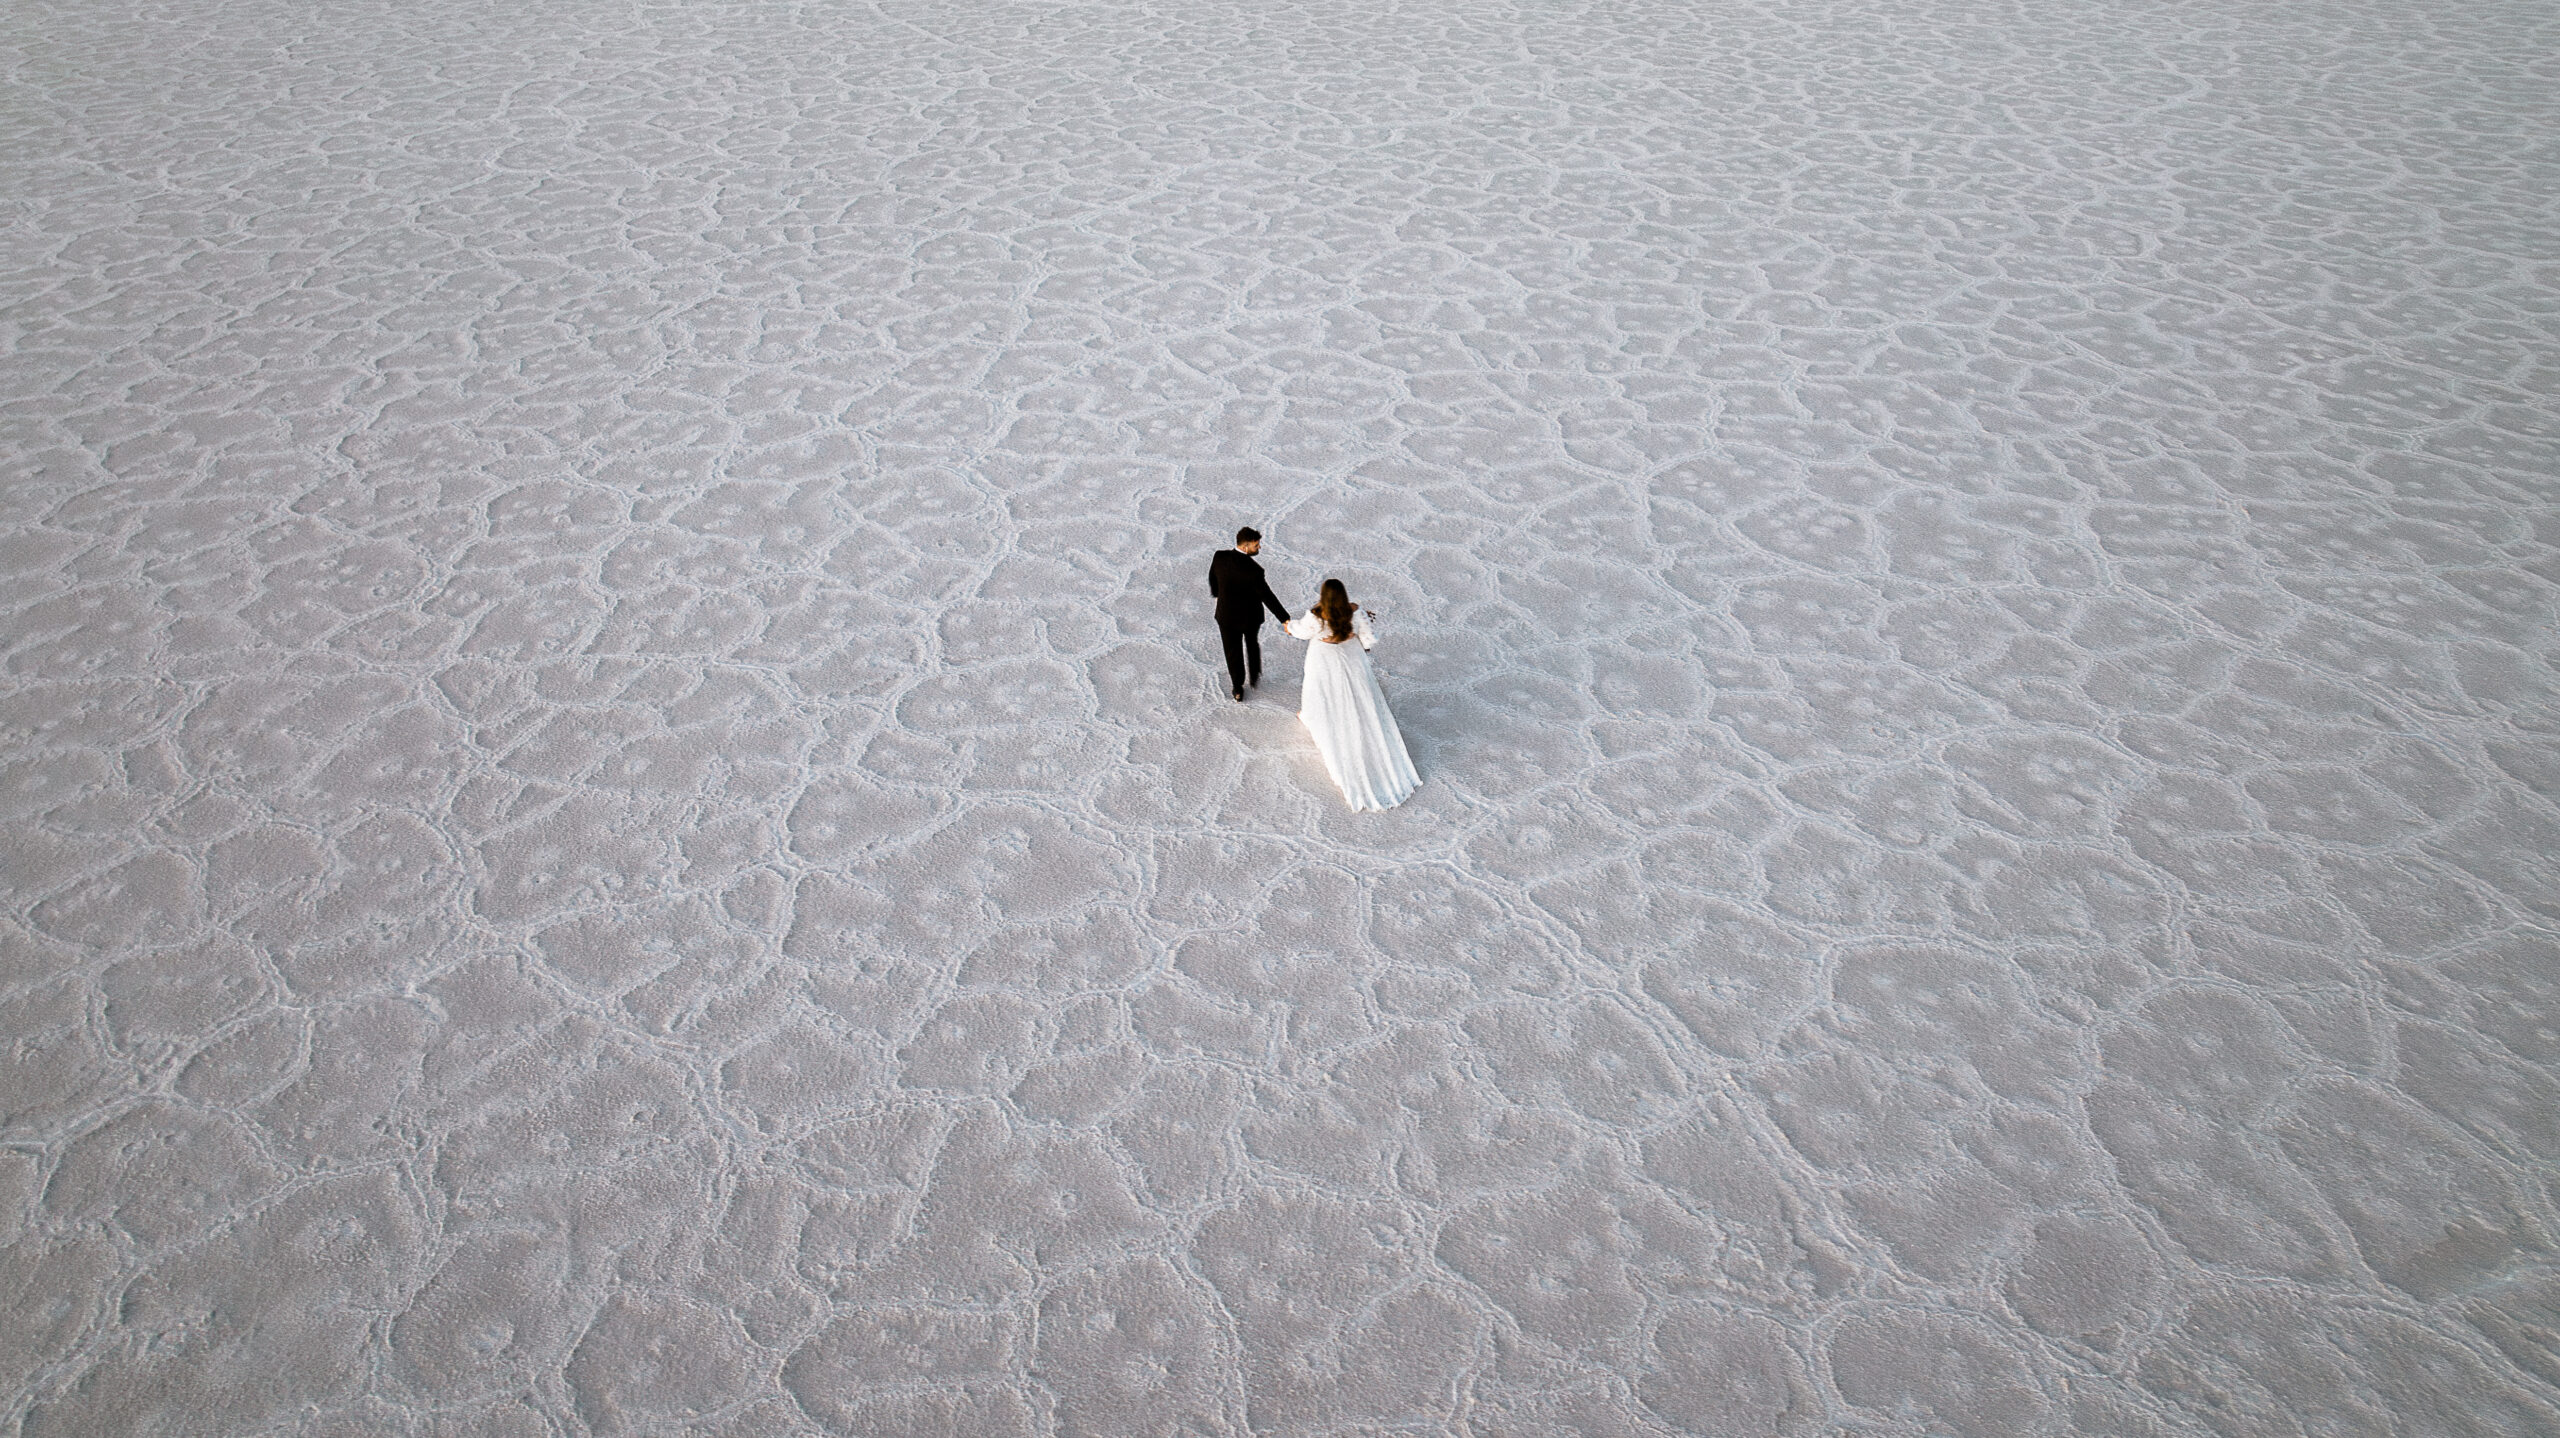 Drone photo of a Couple walking on the Textured Bonneville Salt Flats in utah